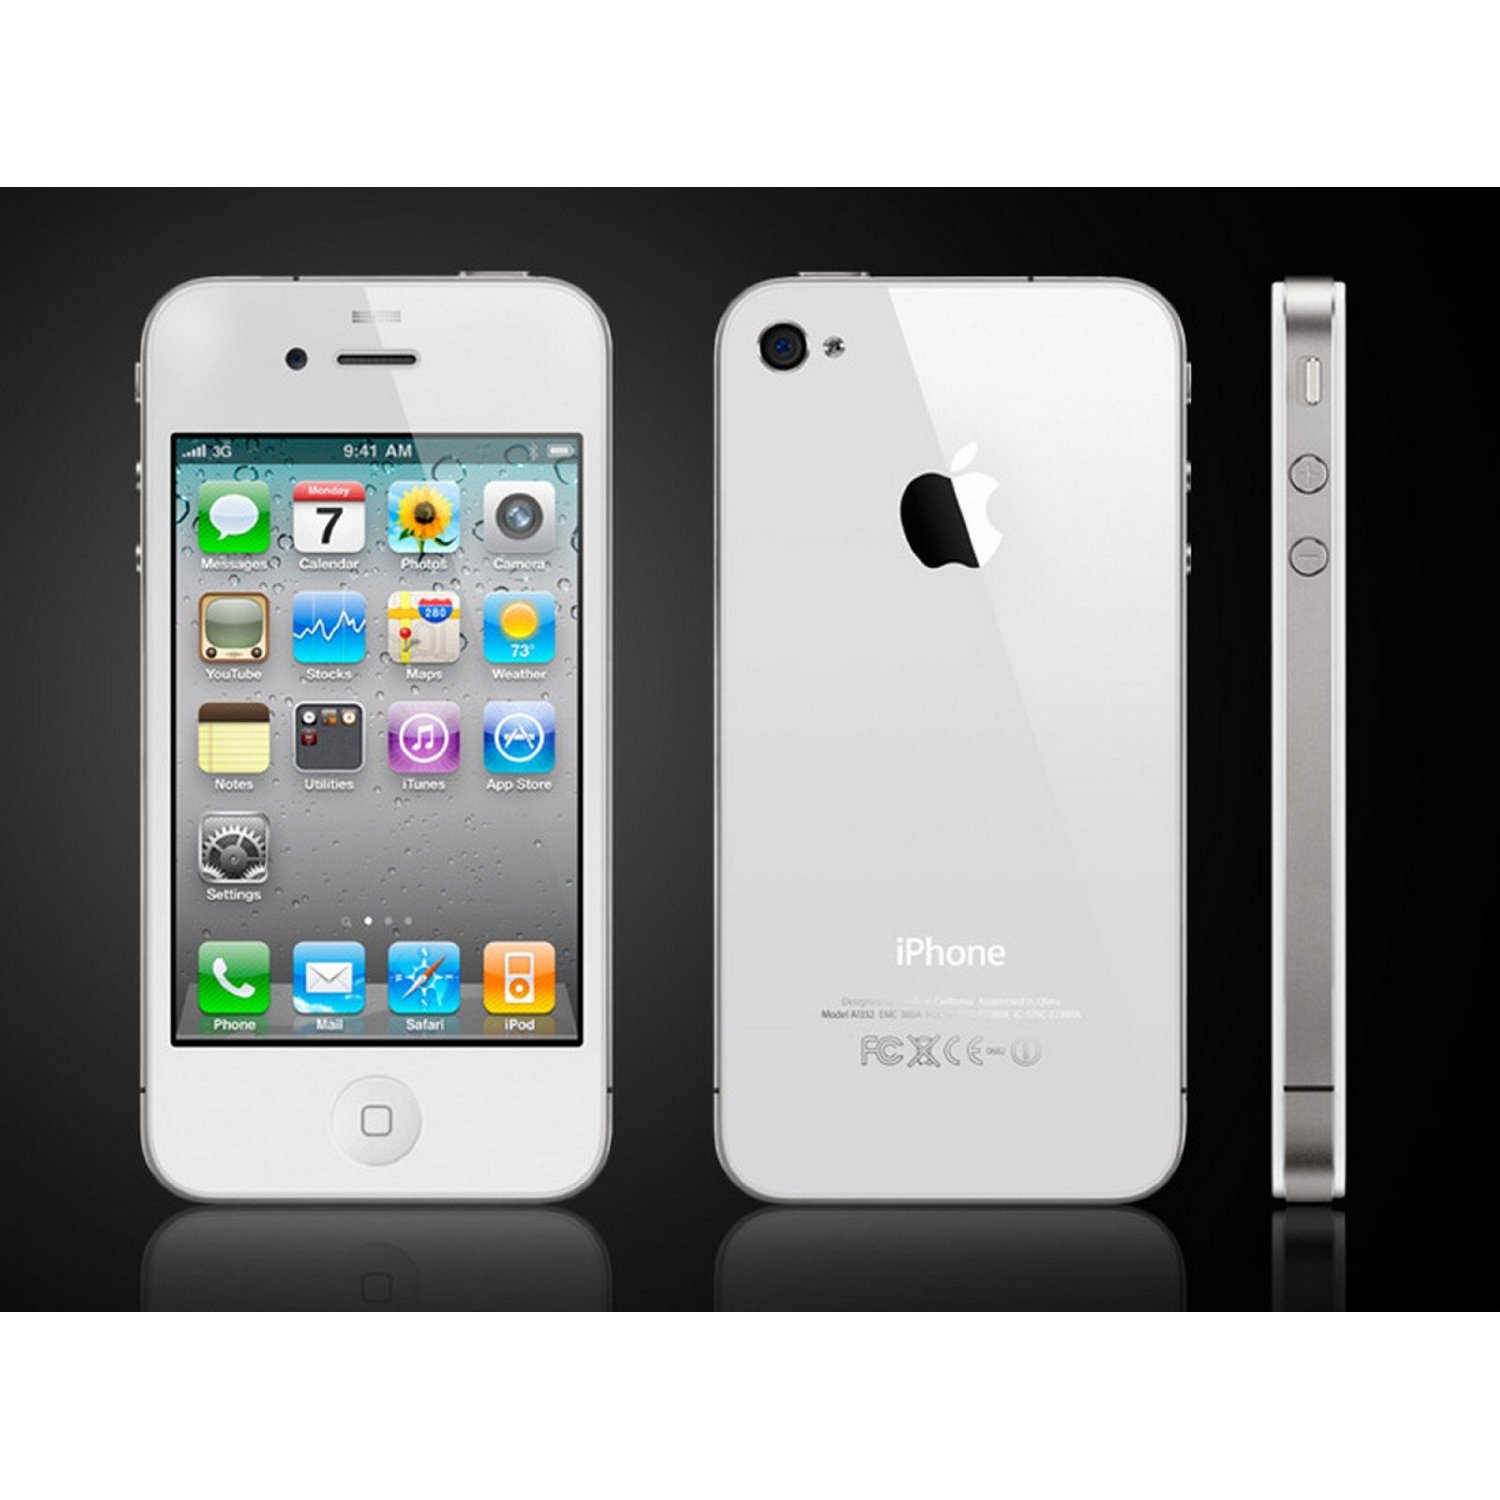 BRAND NEW iPhone 4s White  16 GB Boxed Factory Unlocked 